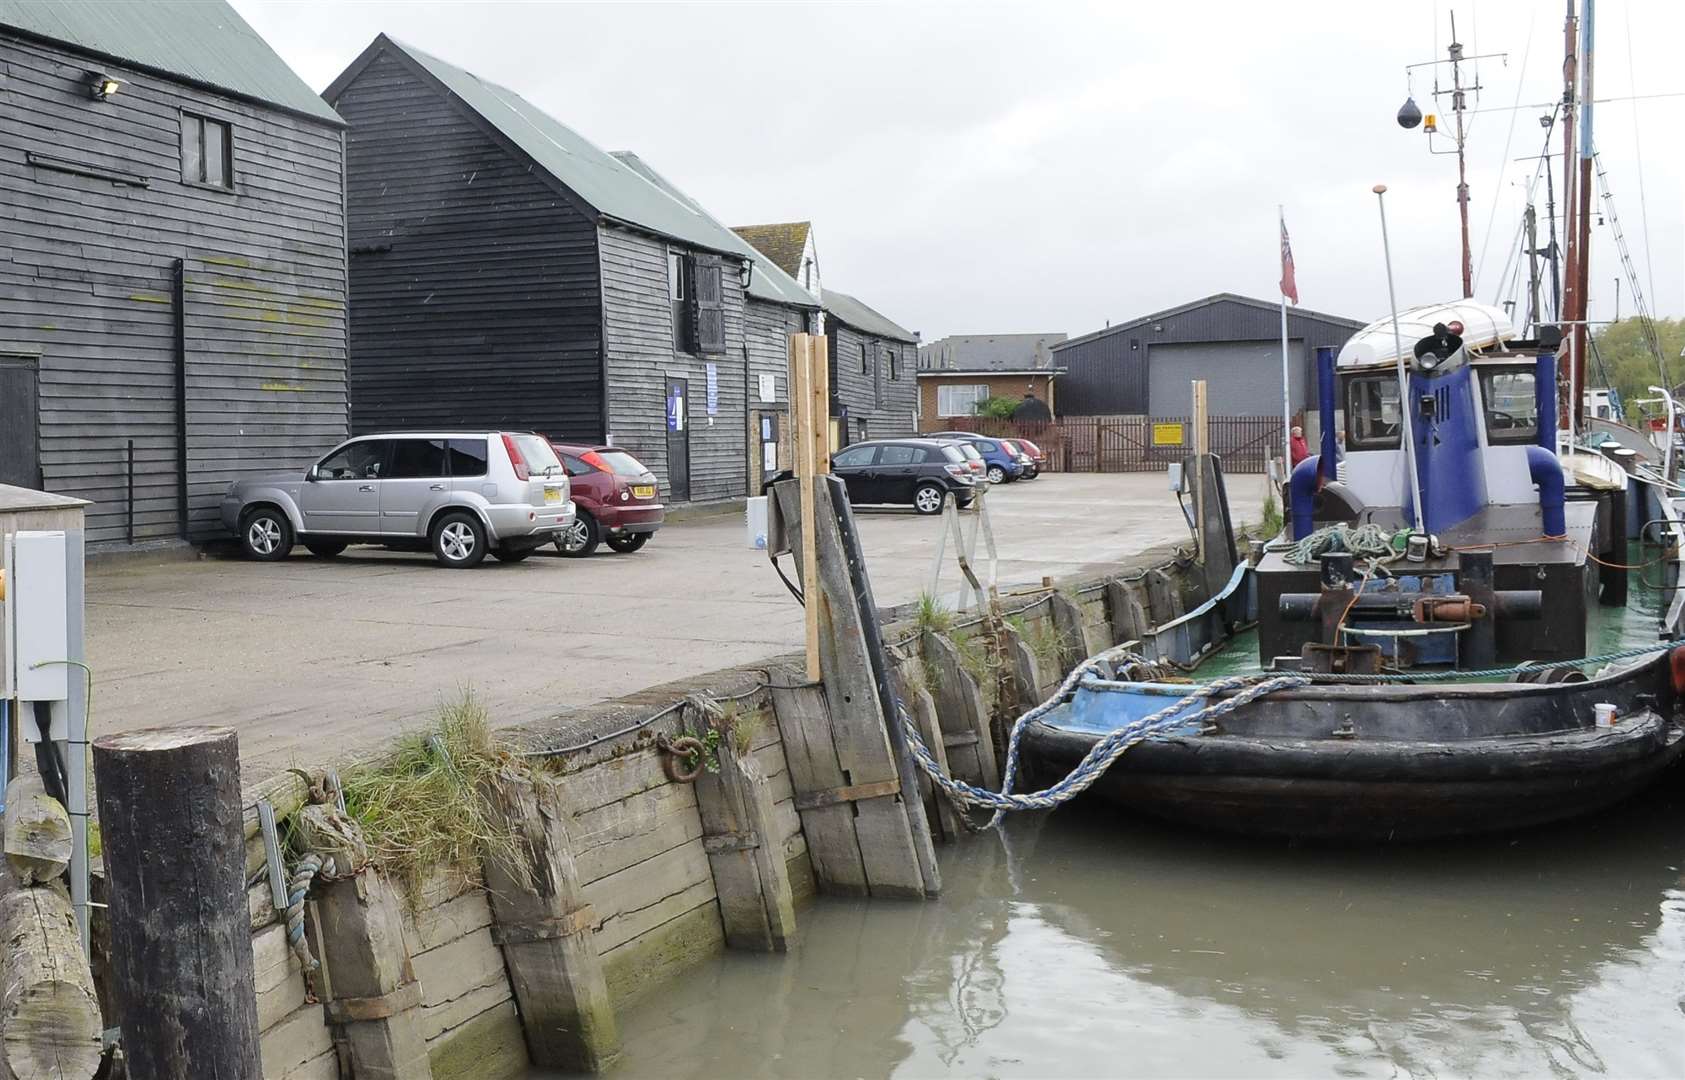 A man was found dead in the water at Standard Quay in Faversham. (12305768)